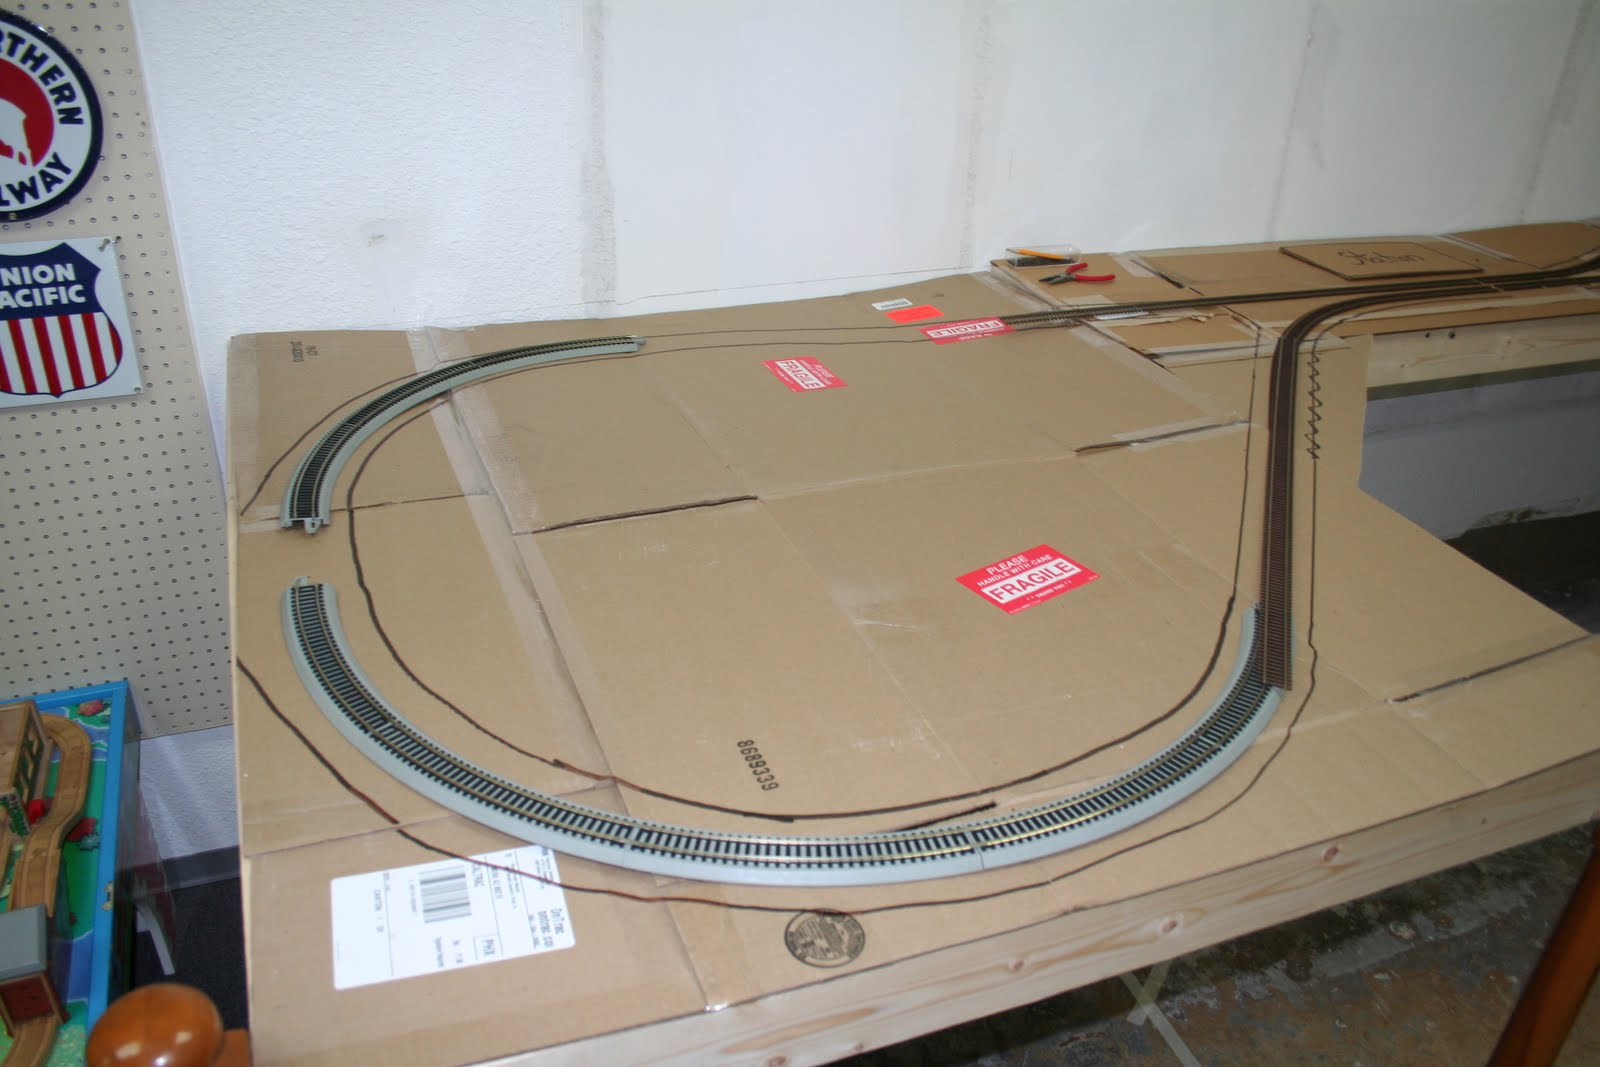 Model train power supply voltage, bachmann ho track layout 